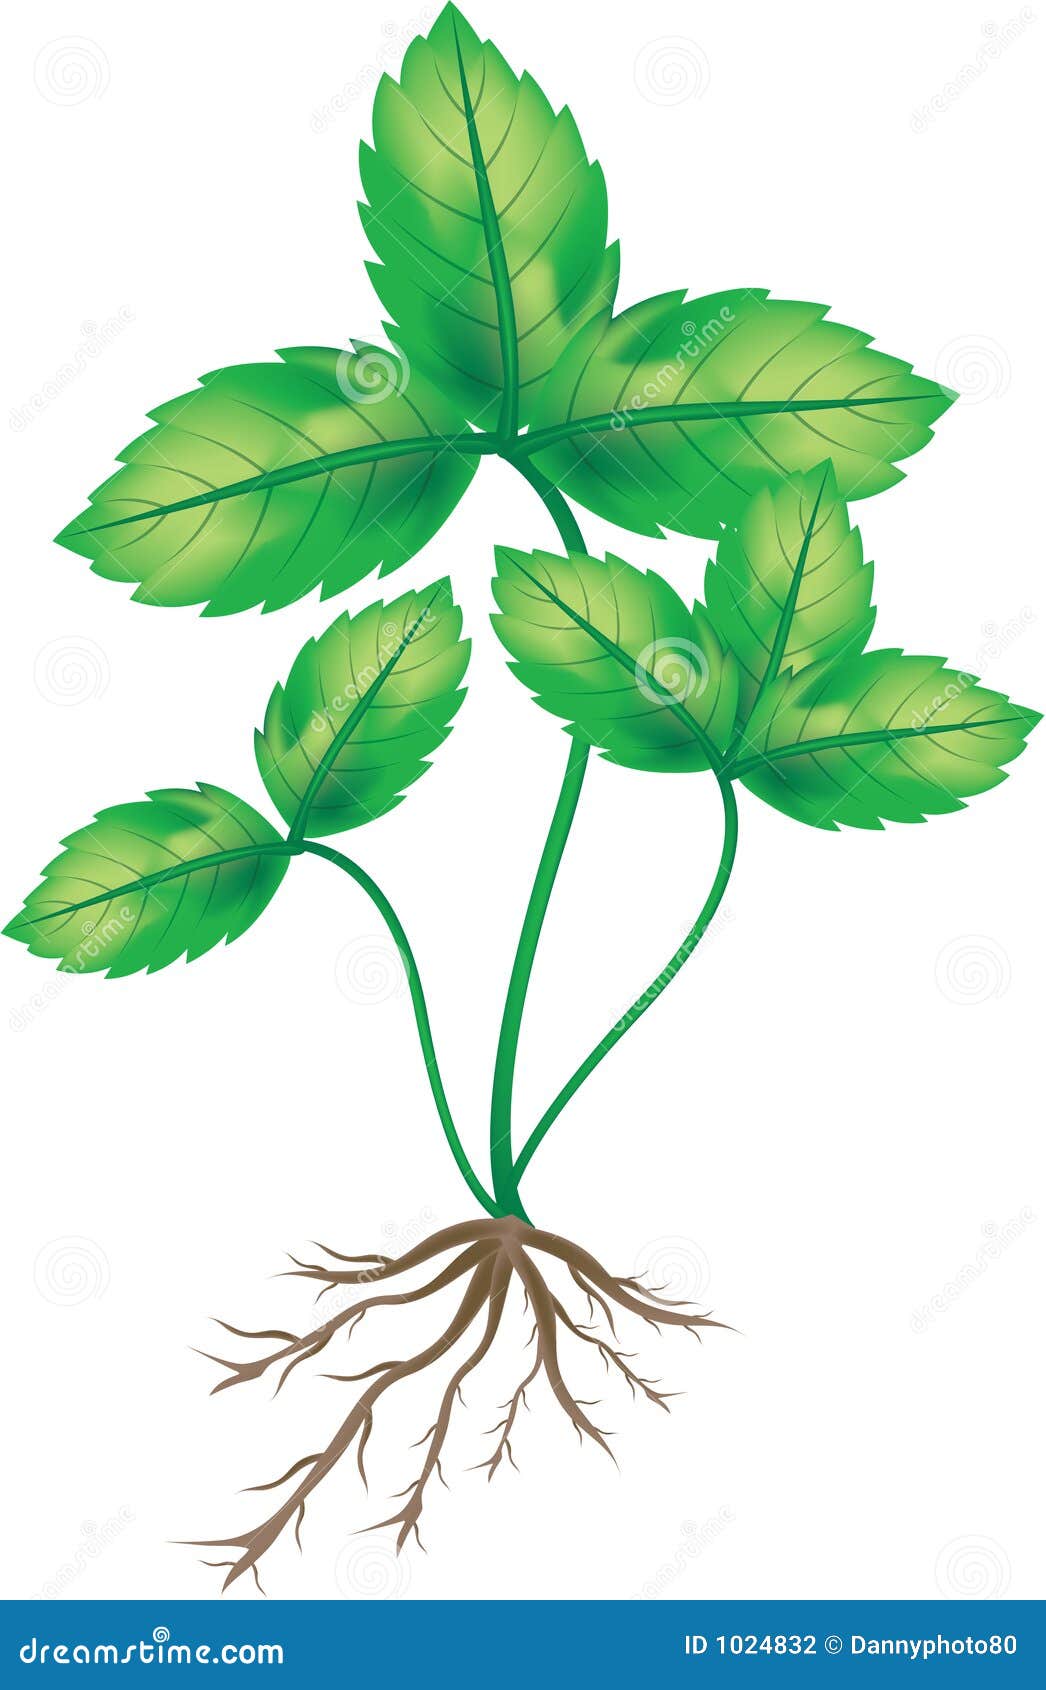 flower with roots clipart - photo #20